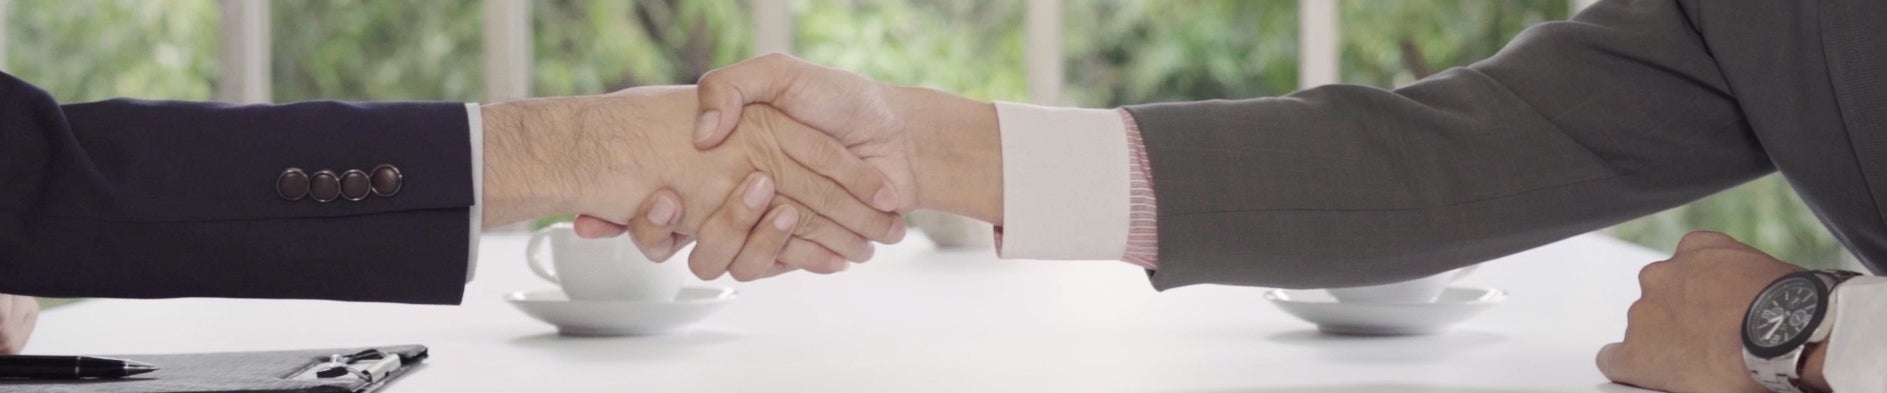 HR and Employment Law - Shaking hands